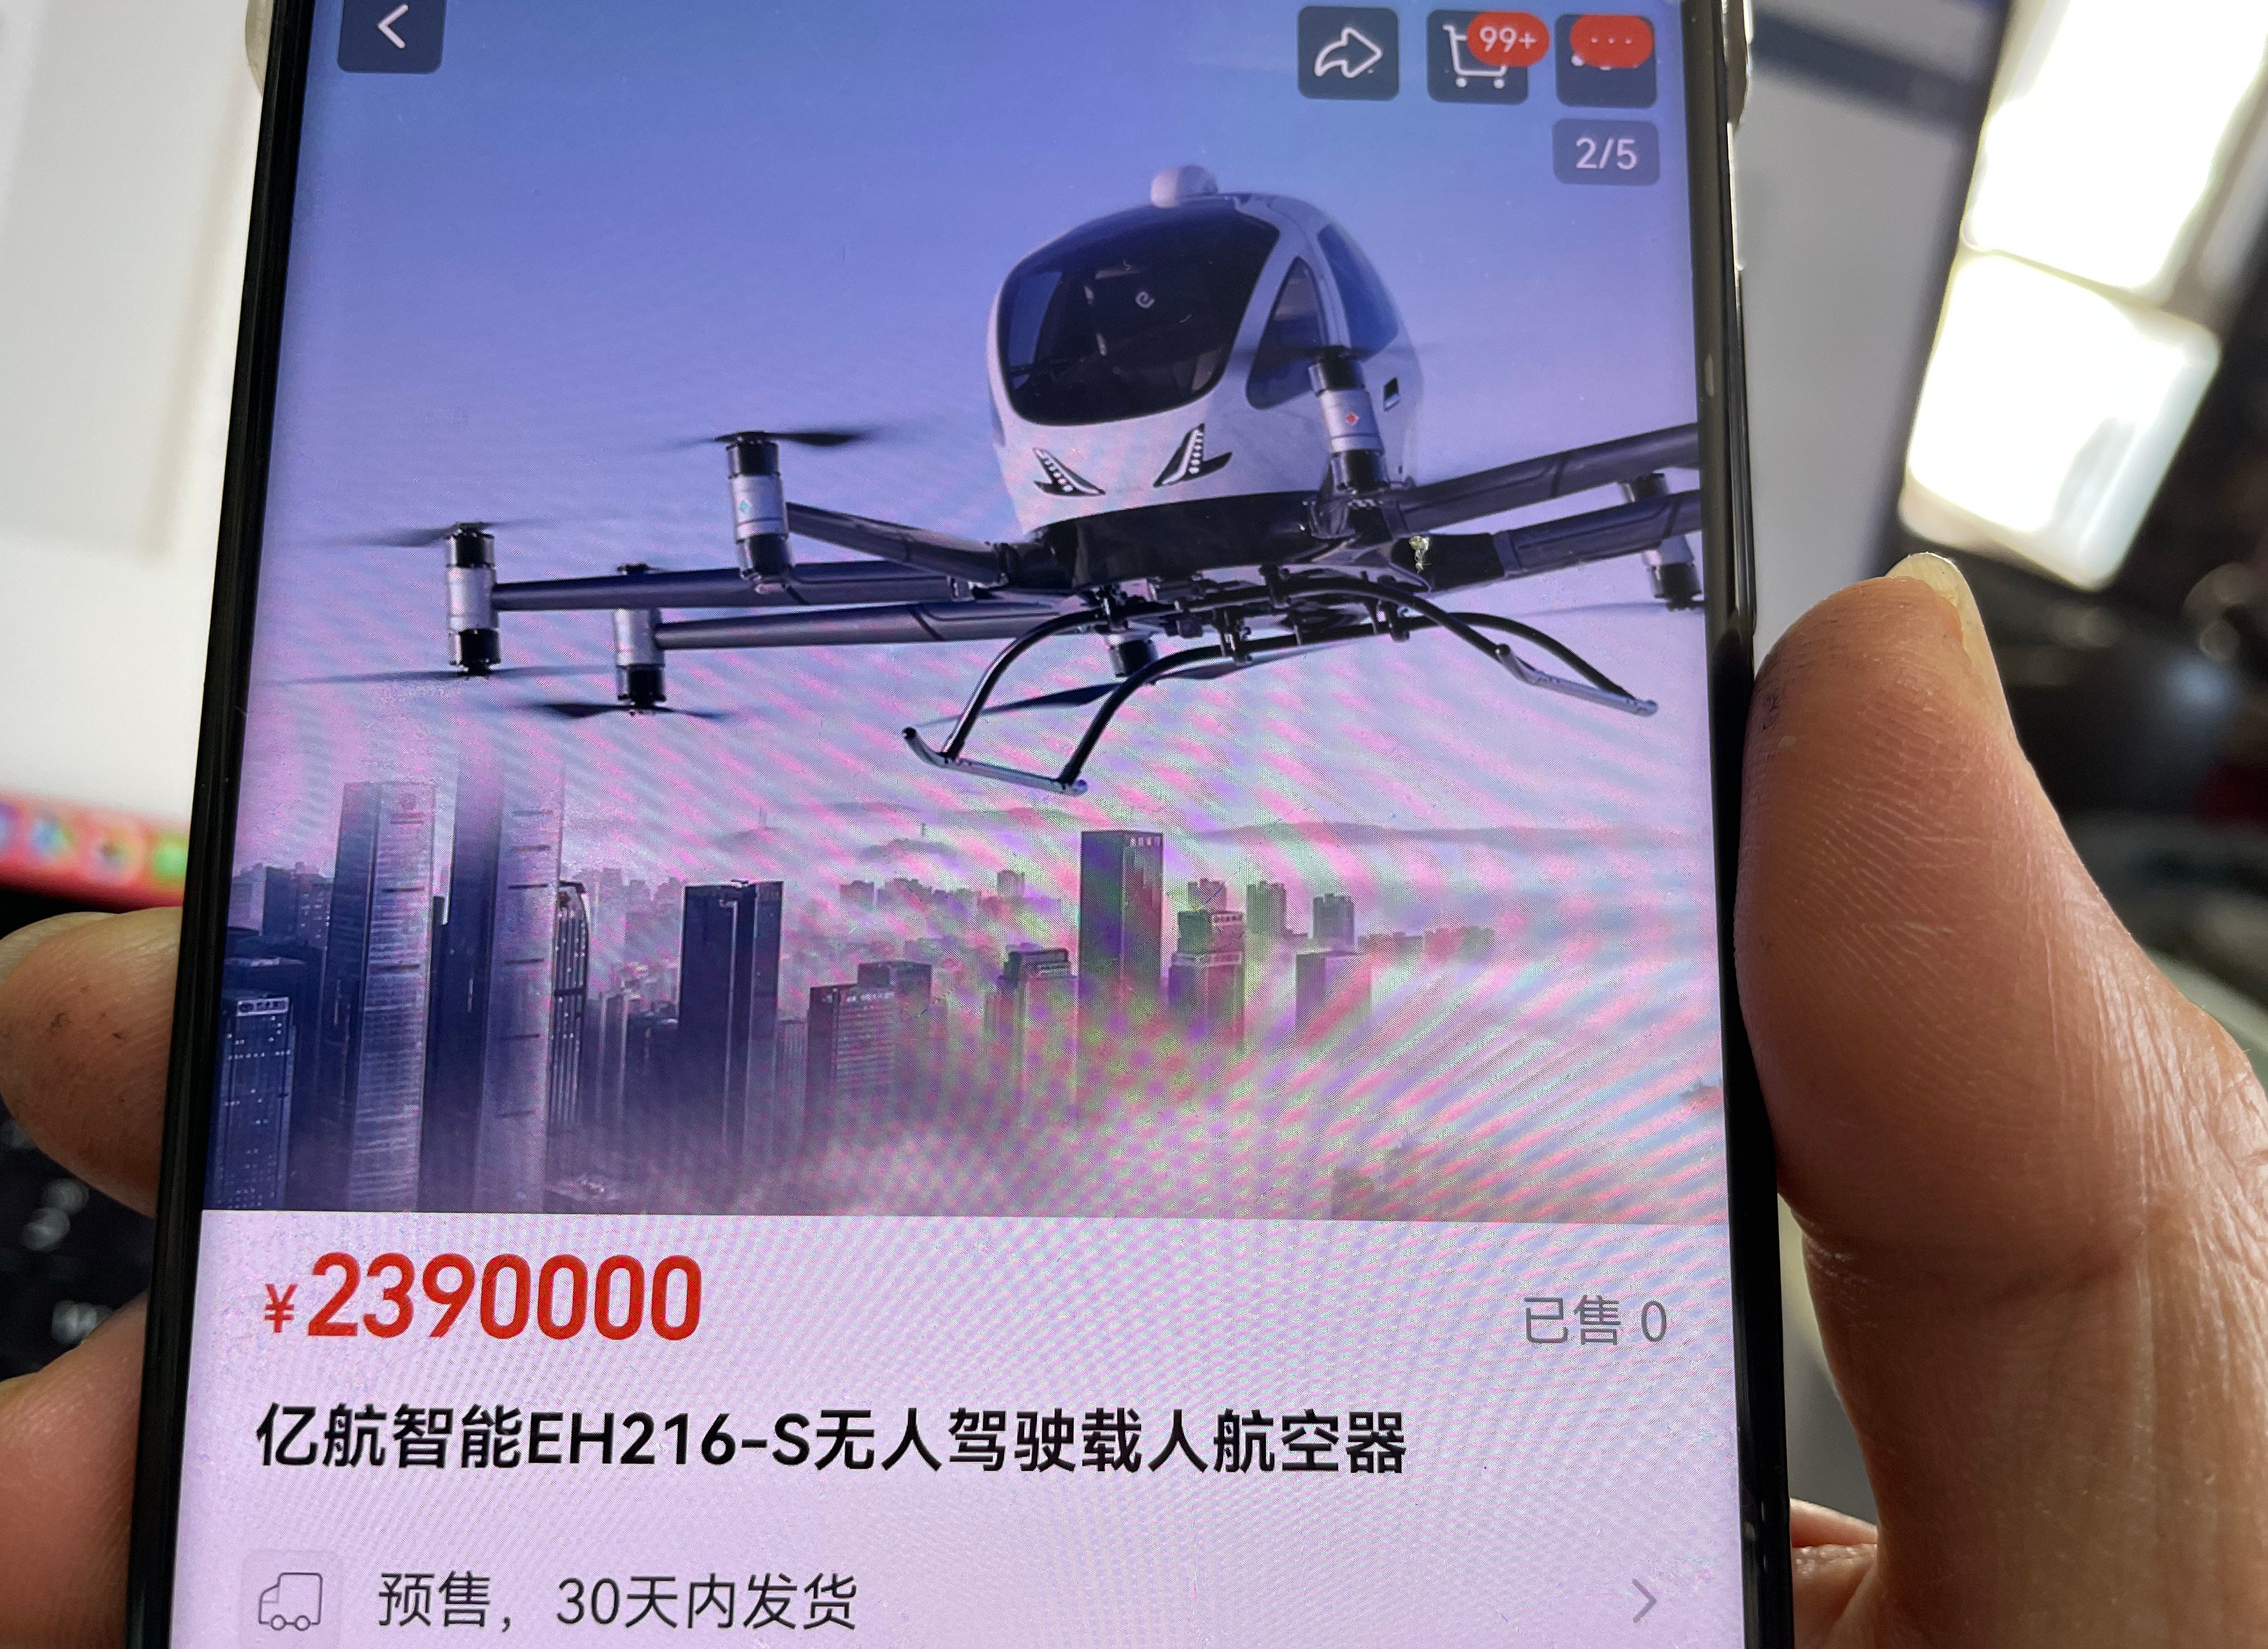 A smartphone screenshot shows EHang’s EH216-S electric vertical take-off and landing vehicle up for sale on Alibaba Group Holding’s Taobao marketplace. Photo: Simon Song